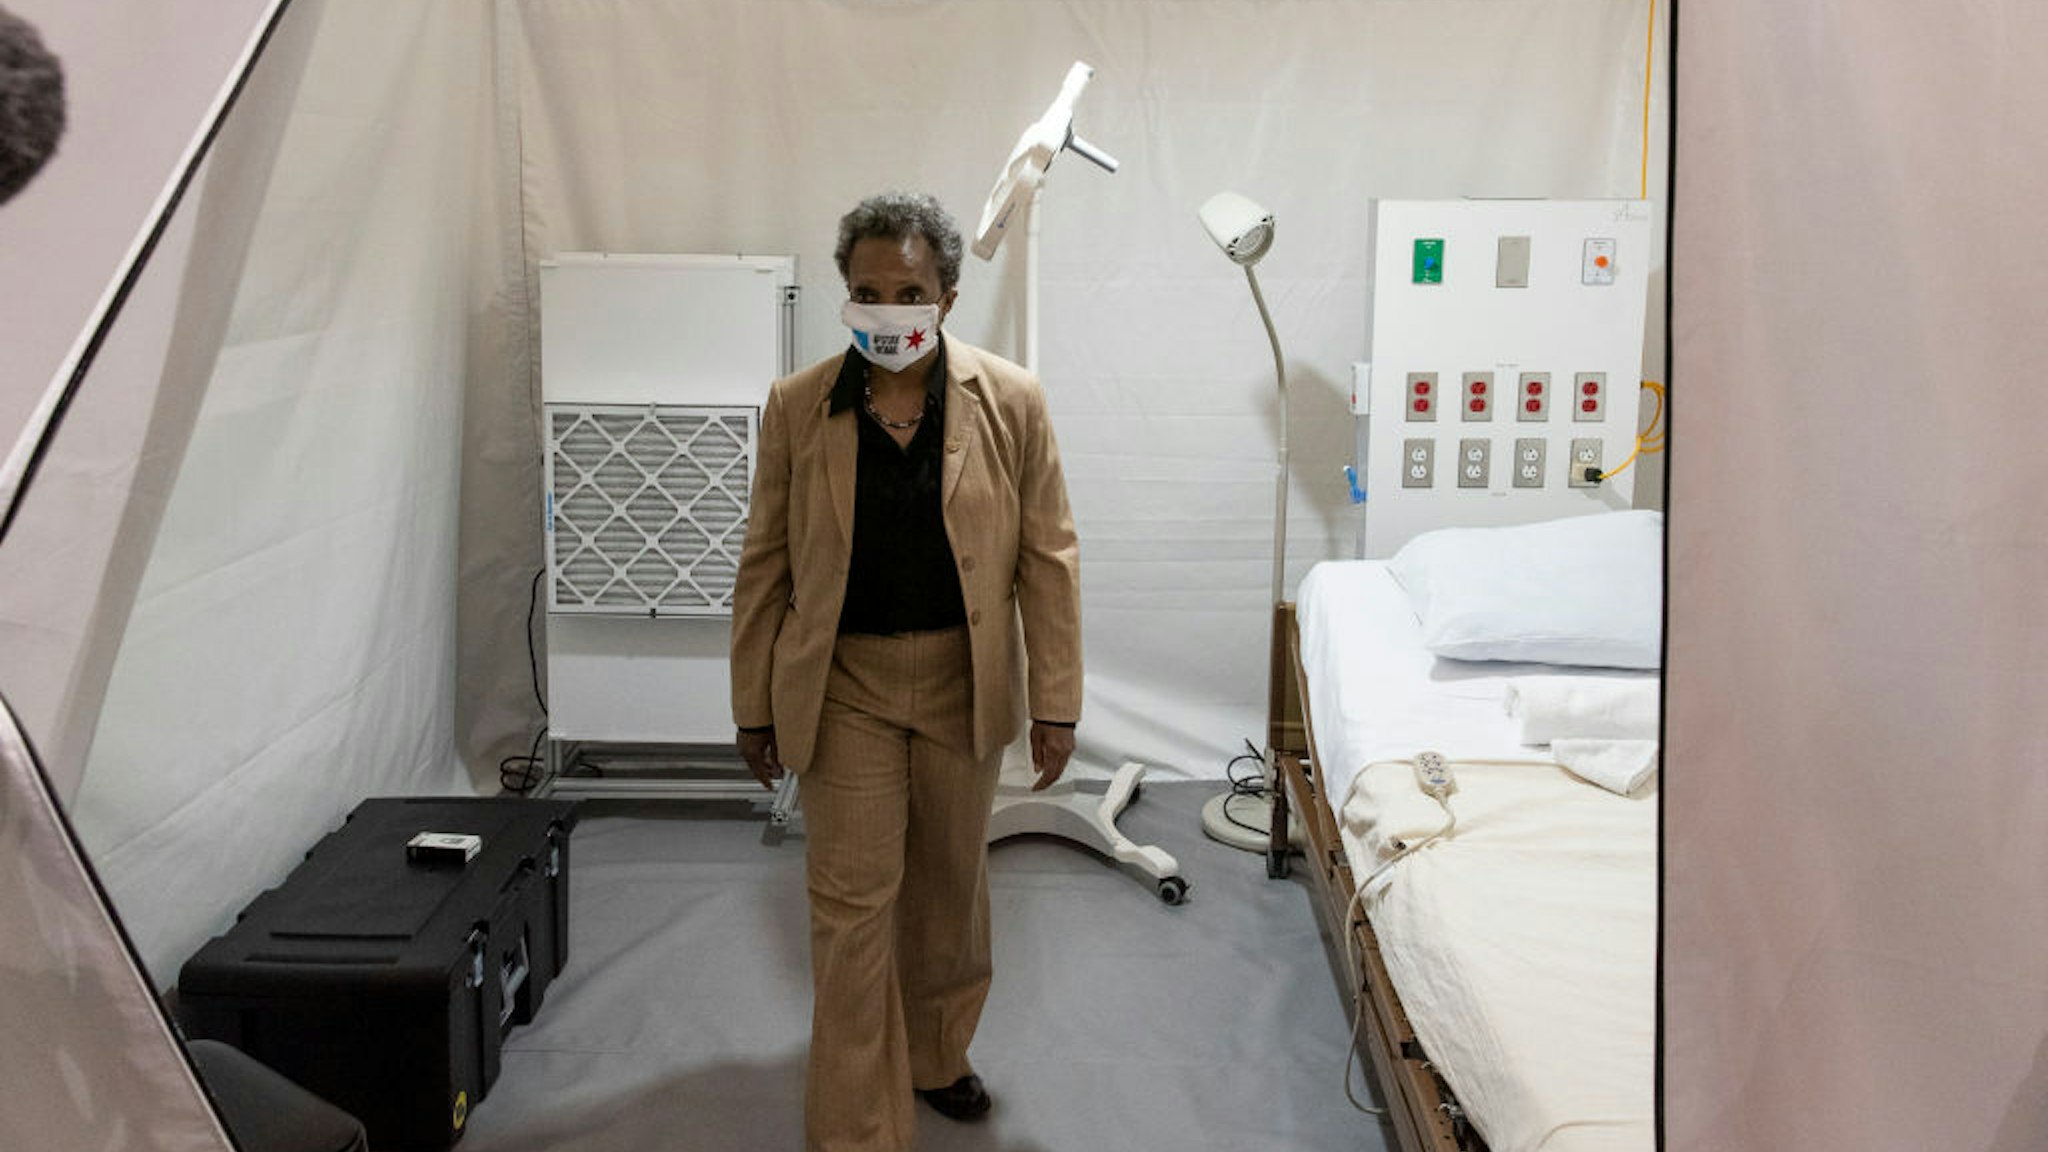 Chicago Mayor Lori Lightfoot tours the COVID-19 alternate care facility constructed at the McCormick Place convention center in Chicago, Illinois on April 17, 2020 in Chicago, Illinois.